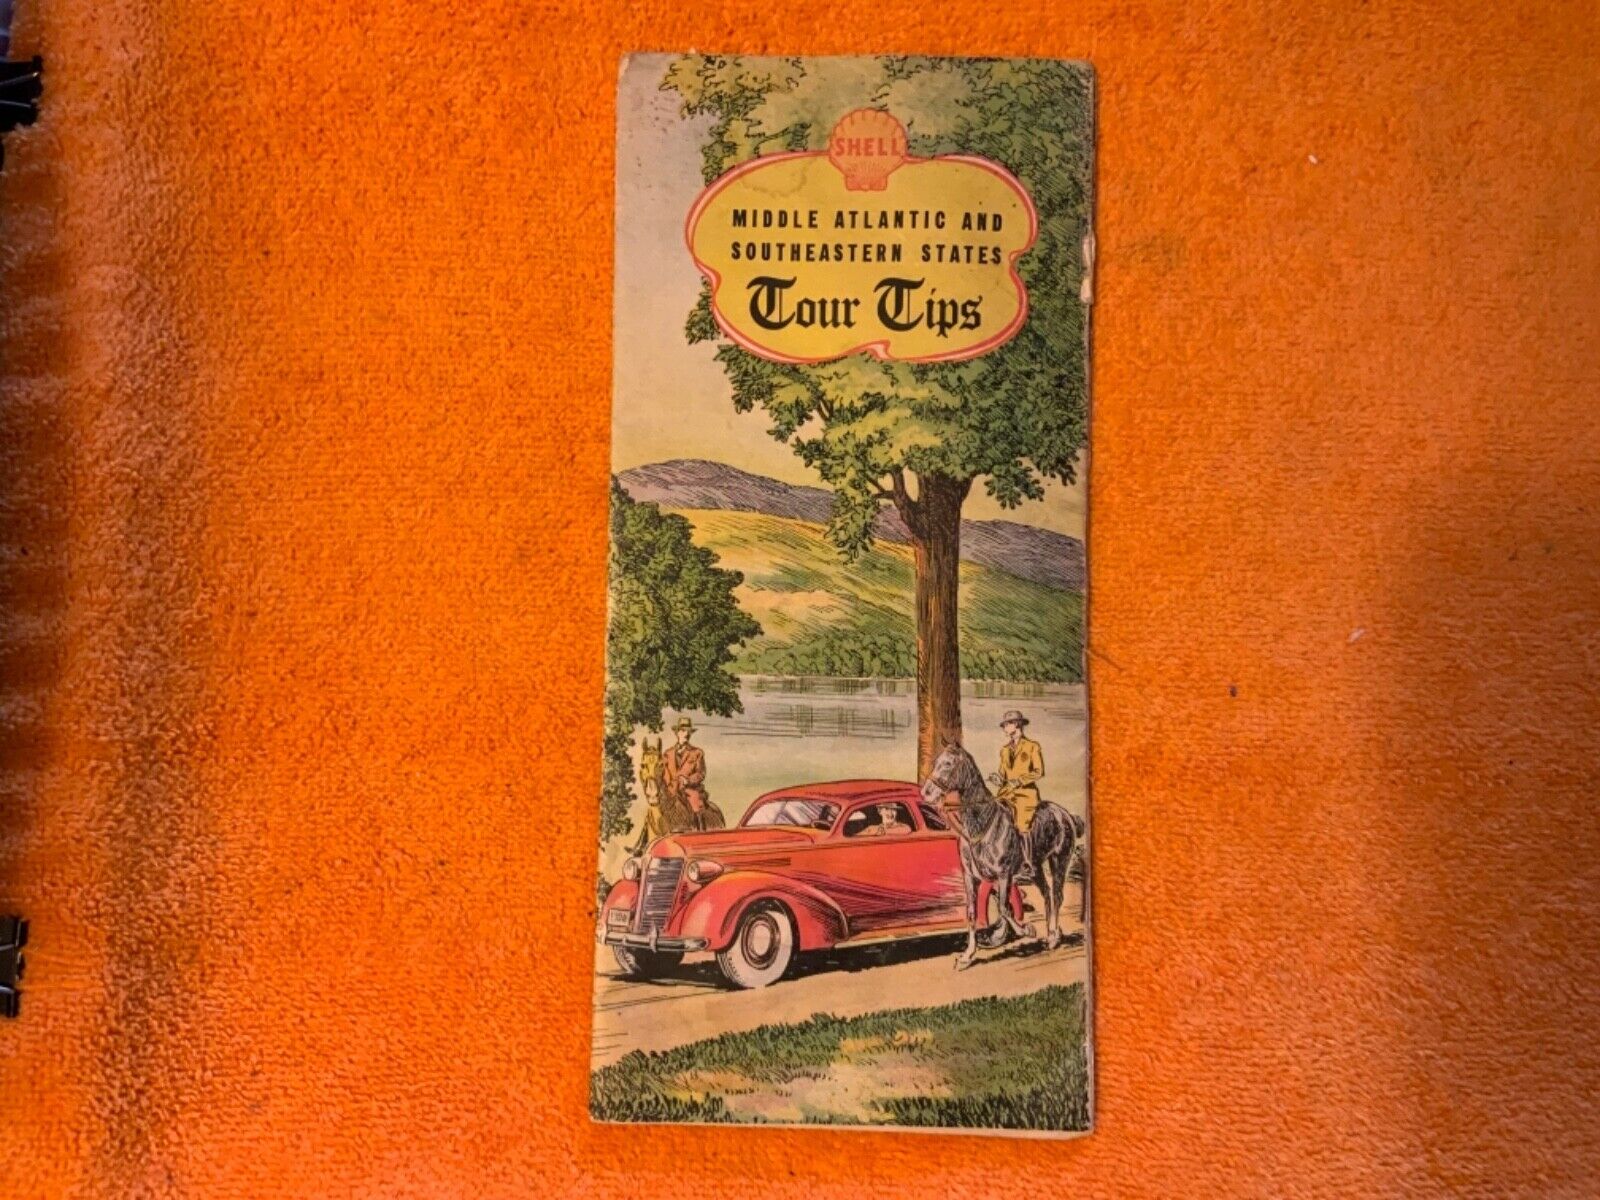 1937 Shell Tour Tips Map Supplement Vintage Petroliana Middle Atlantic & South